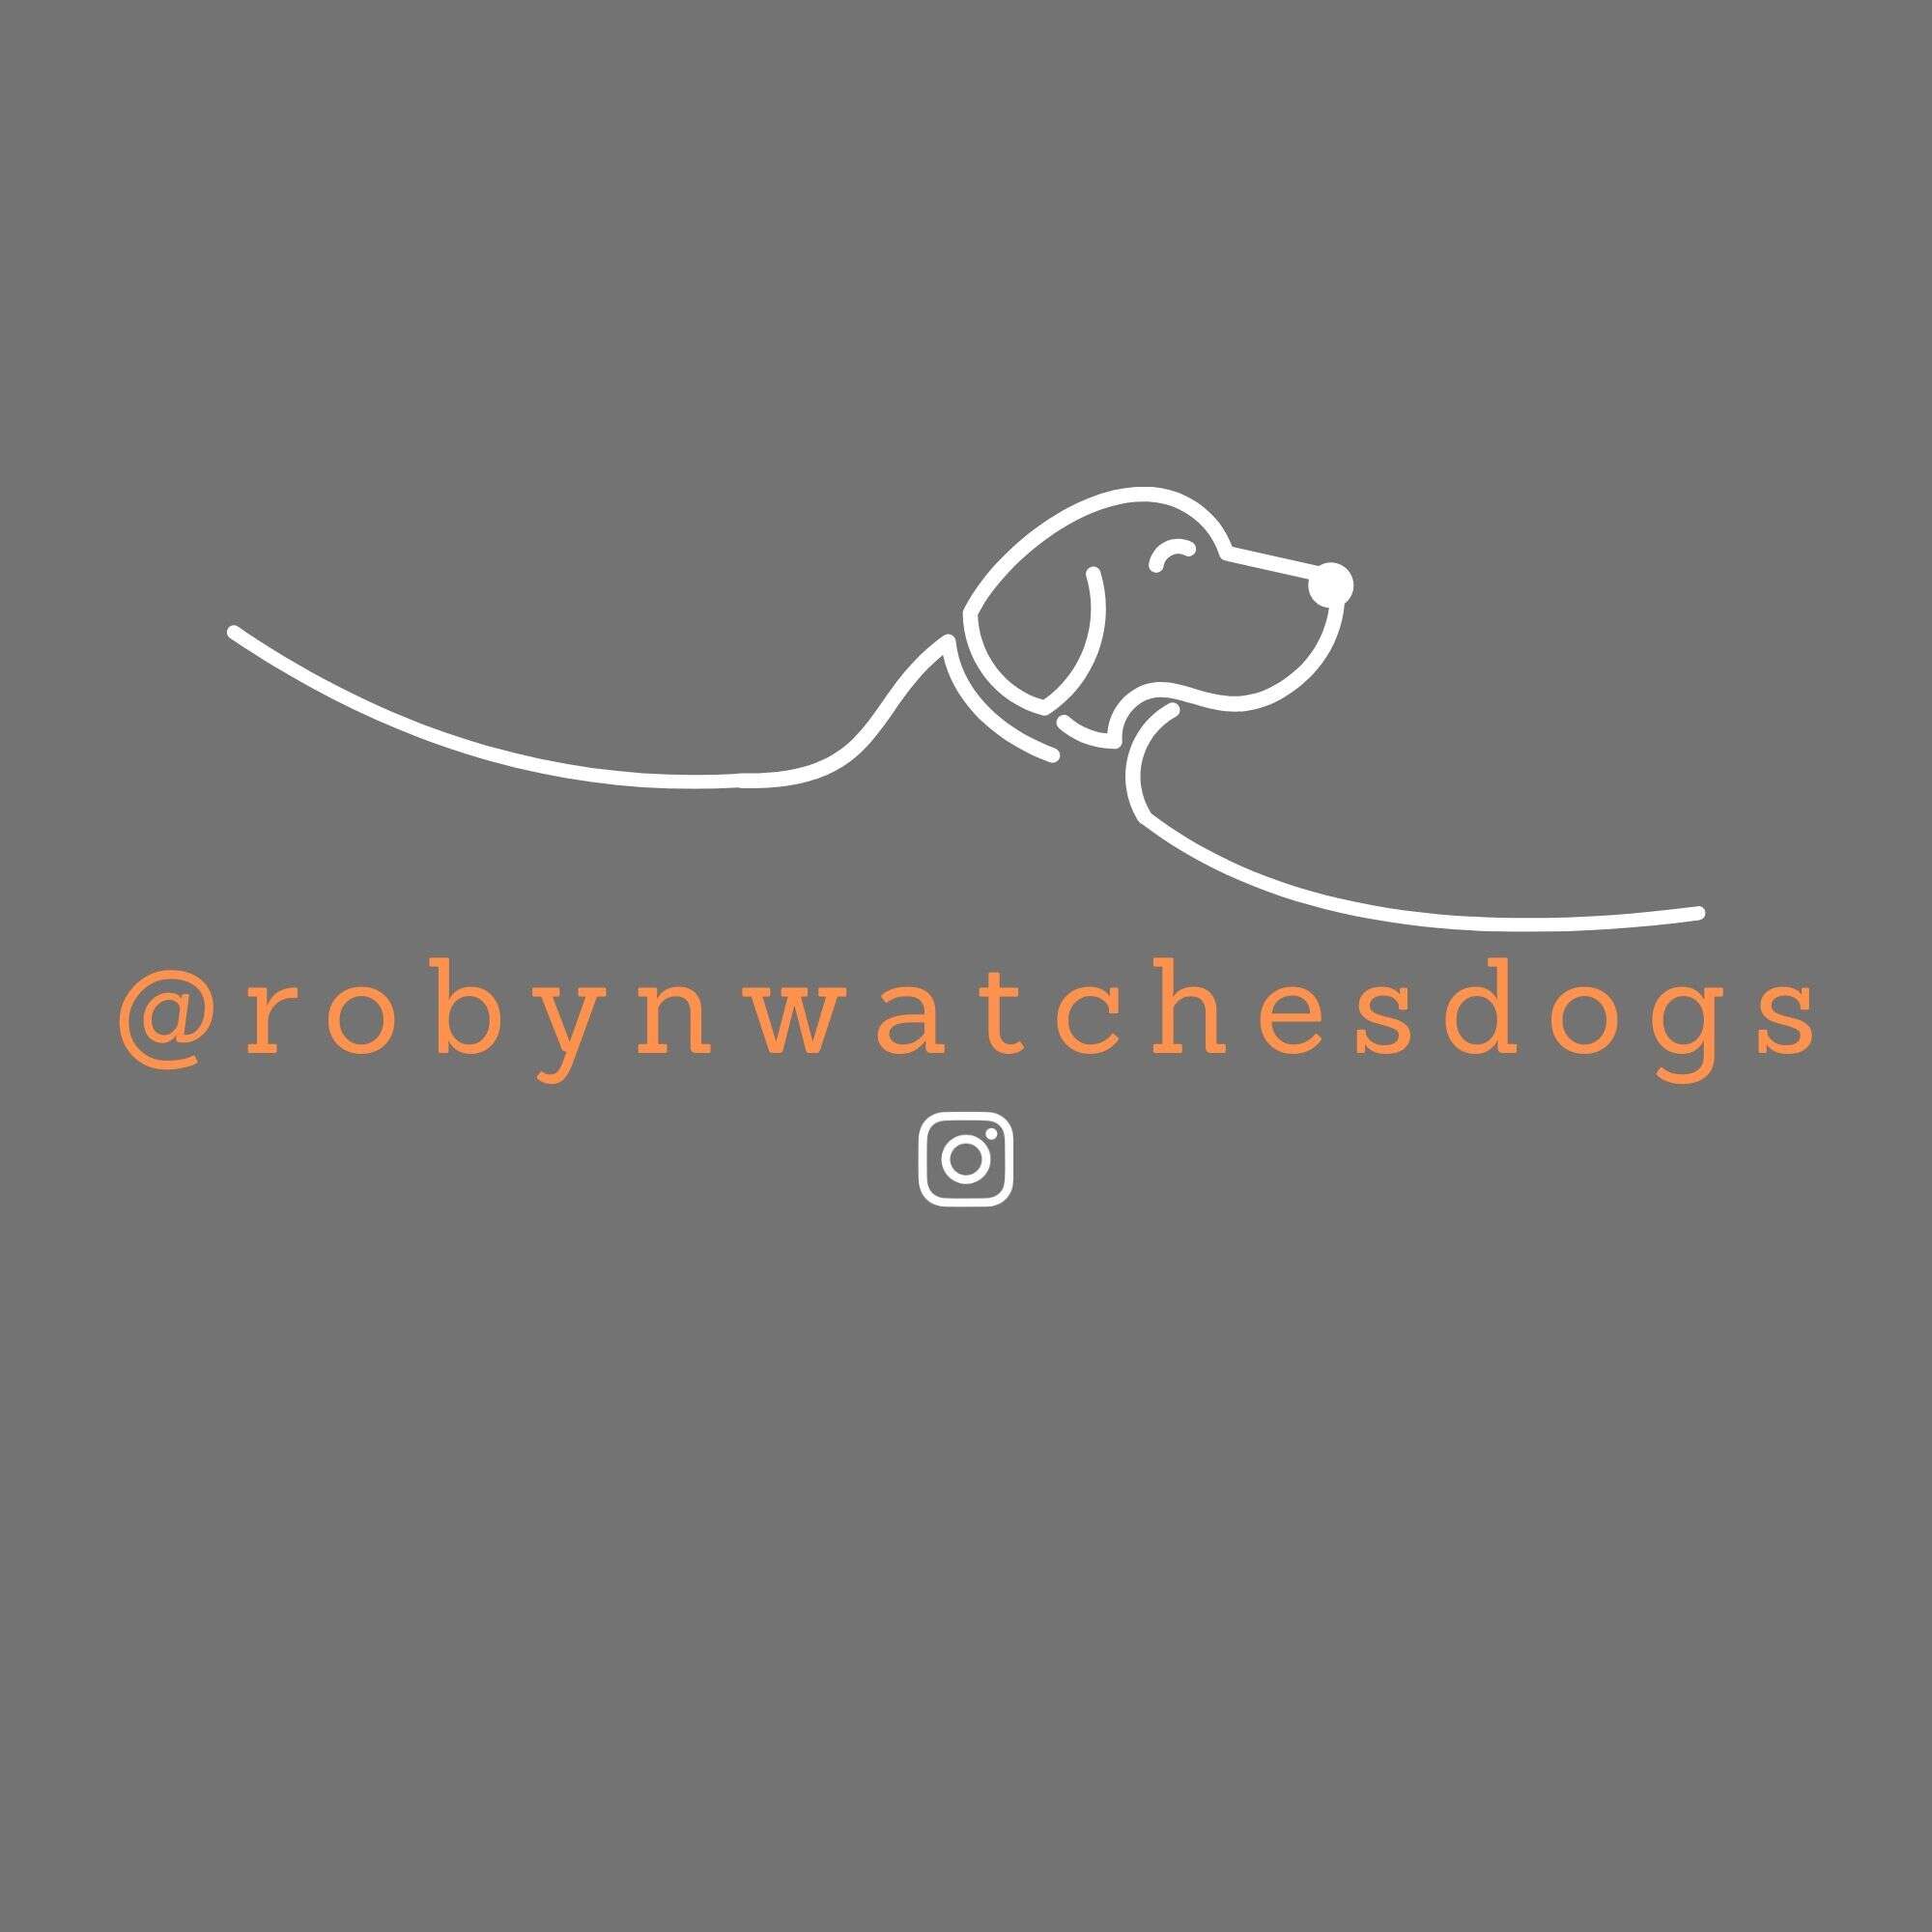 Robyn Watches Dogs